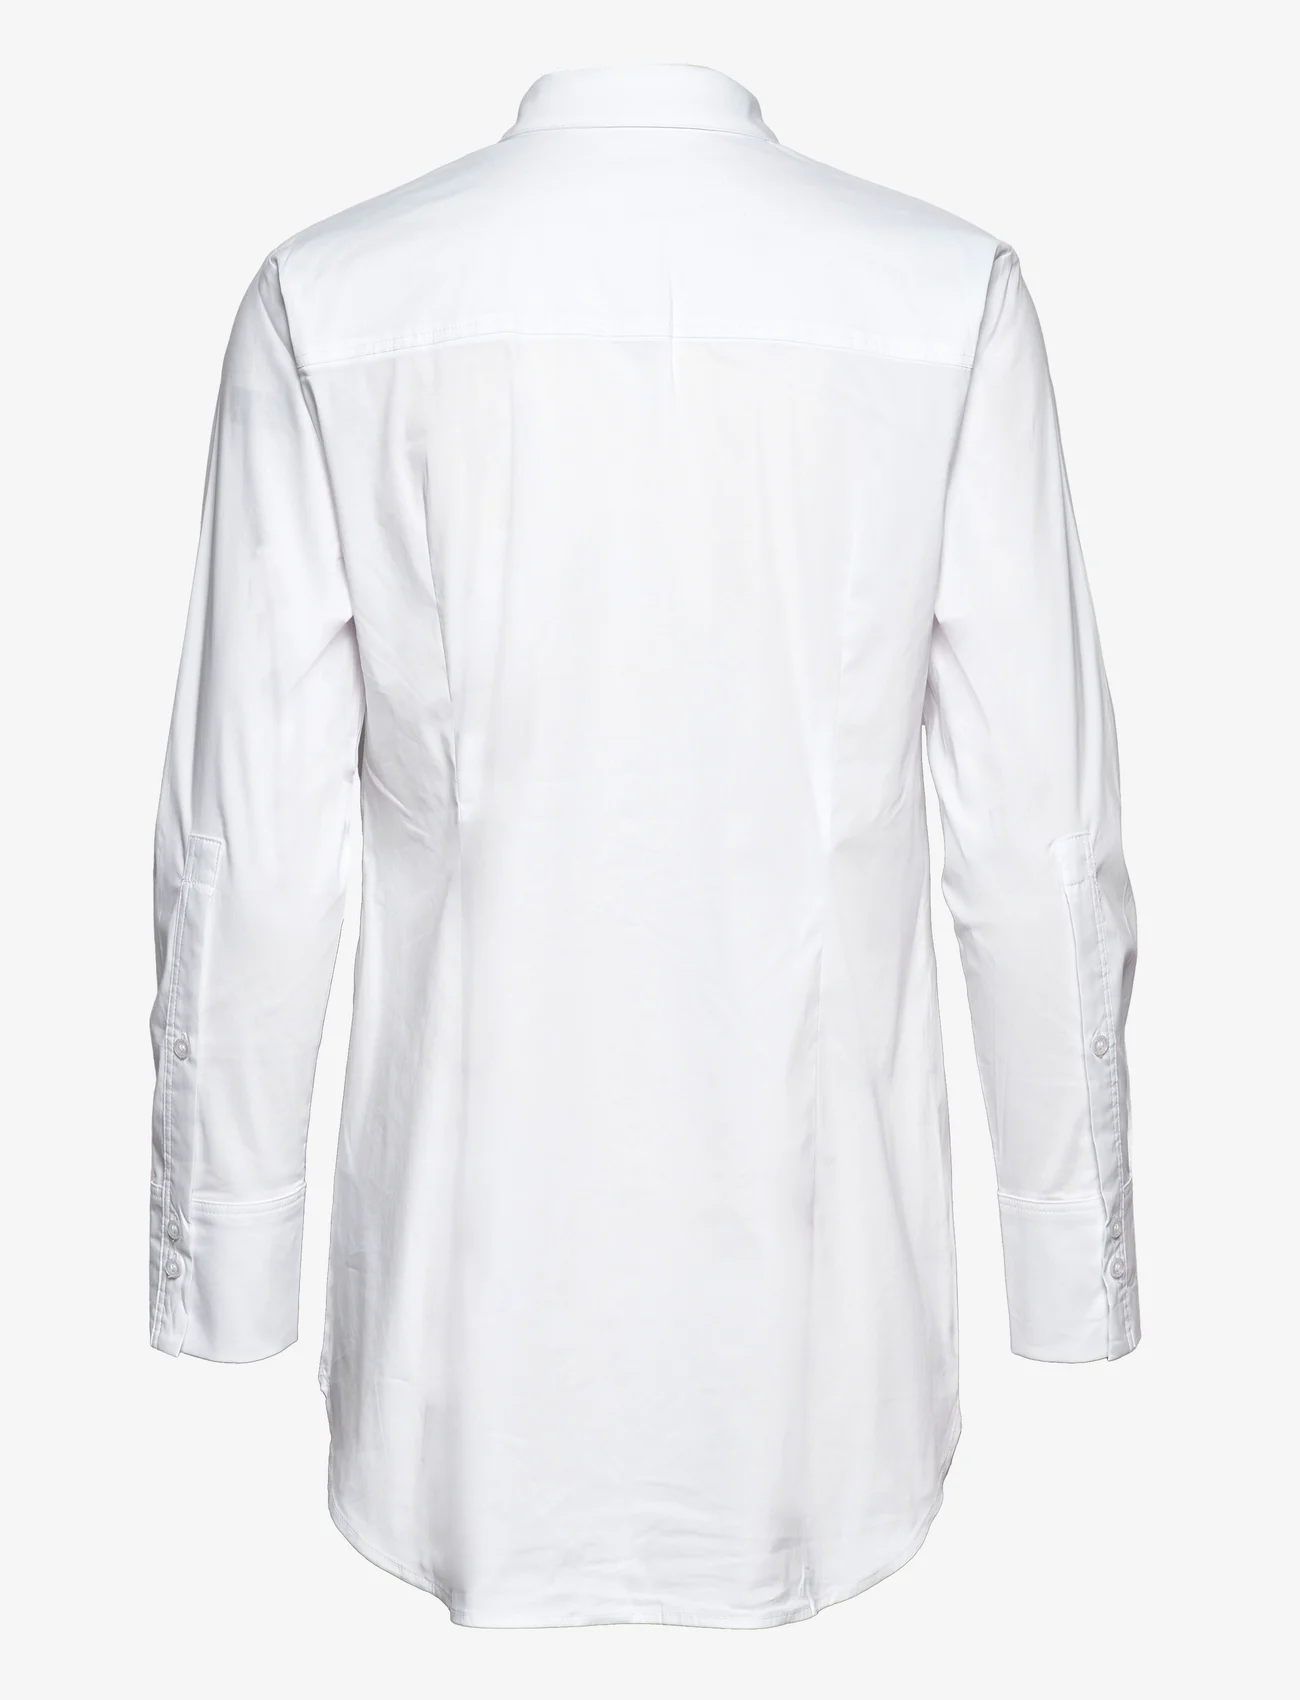 Esprit Collection - Shirt blouse - long-sleeved shirts - white - 1